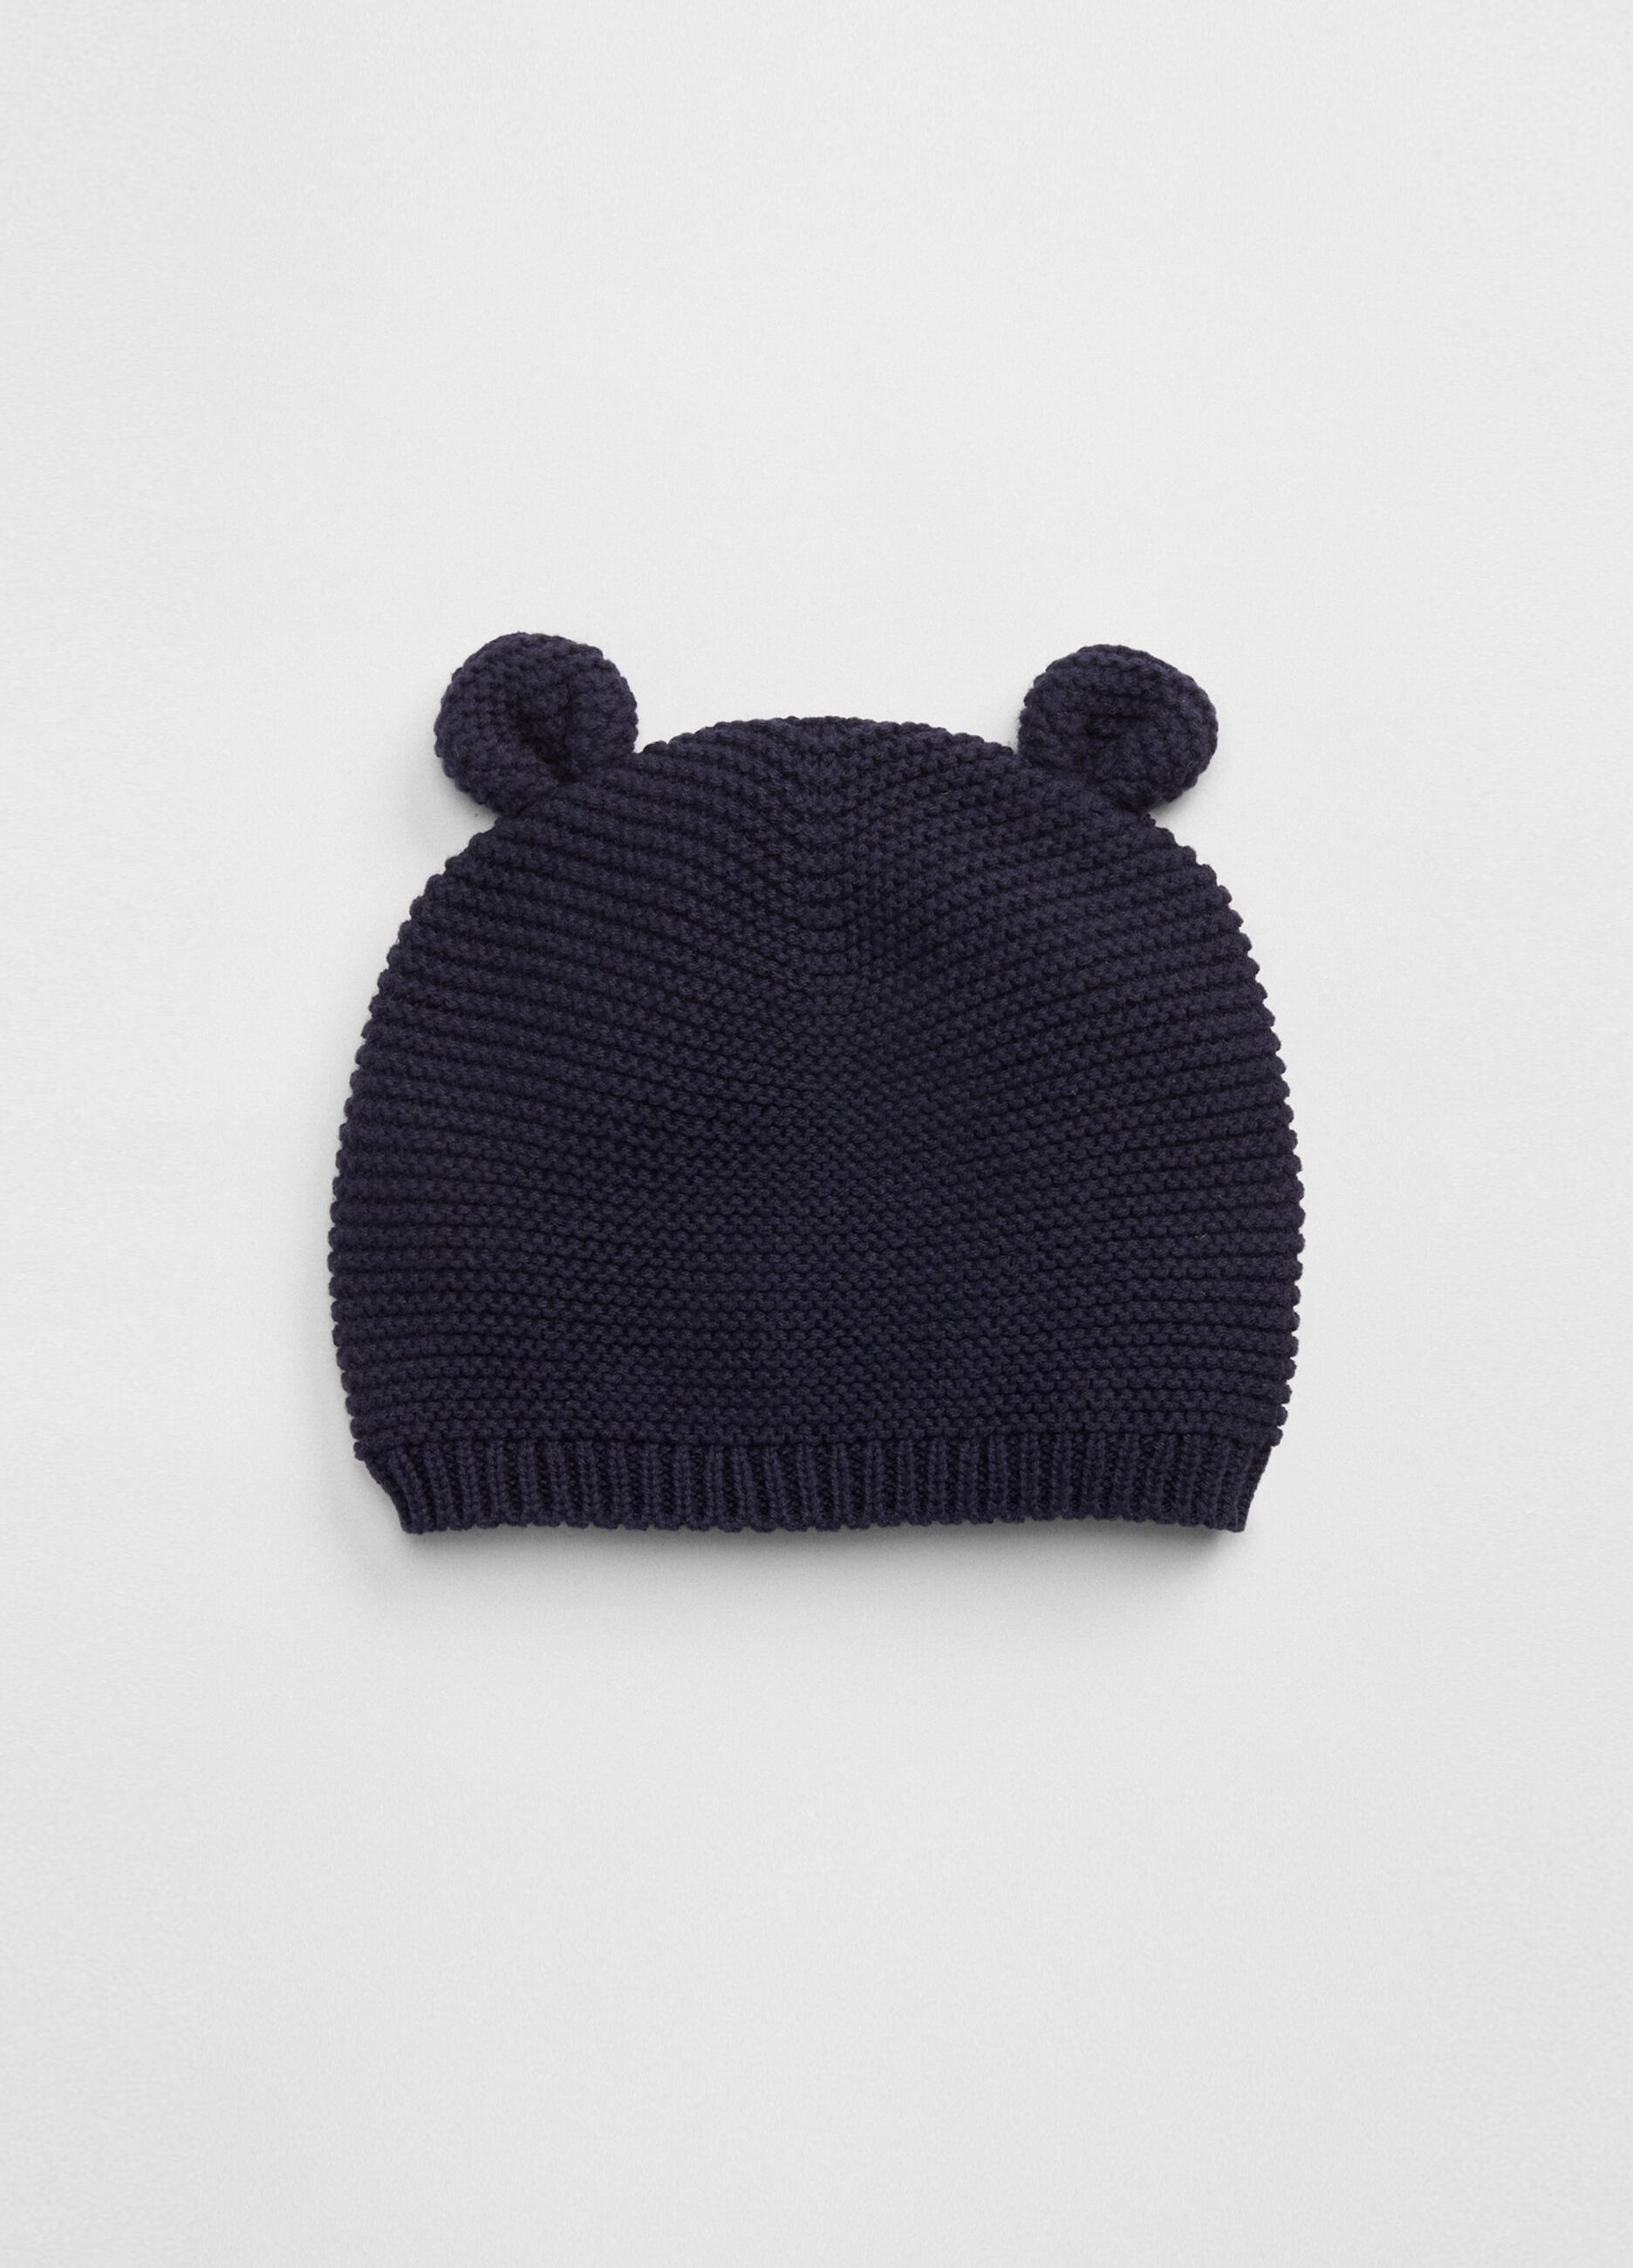 Knitted hat with ears